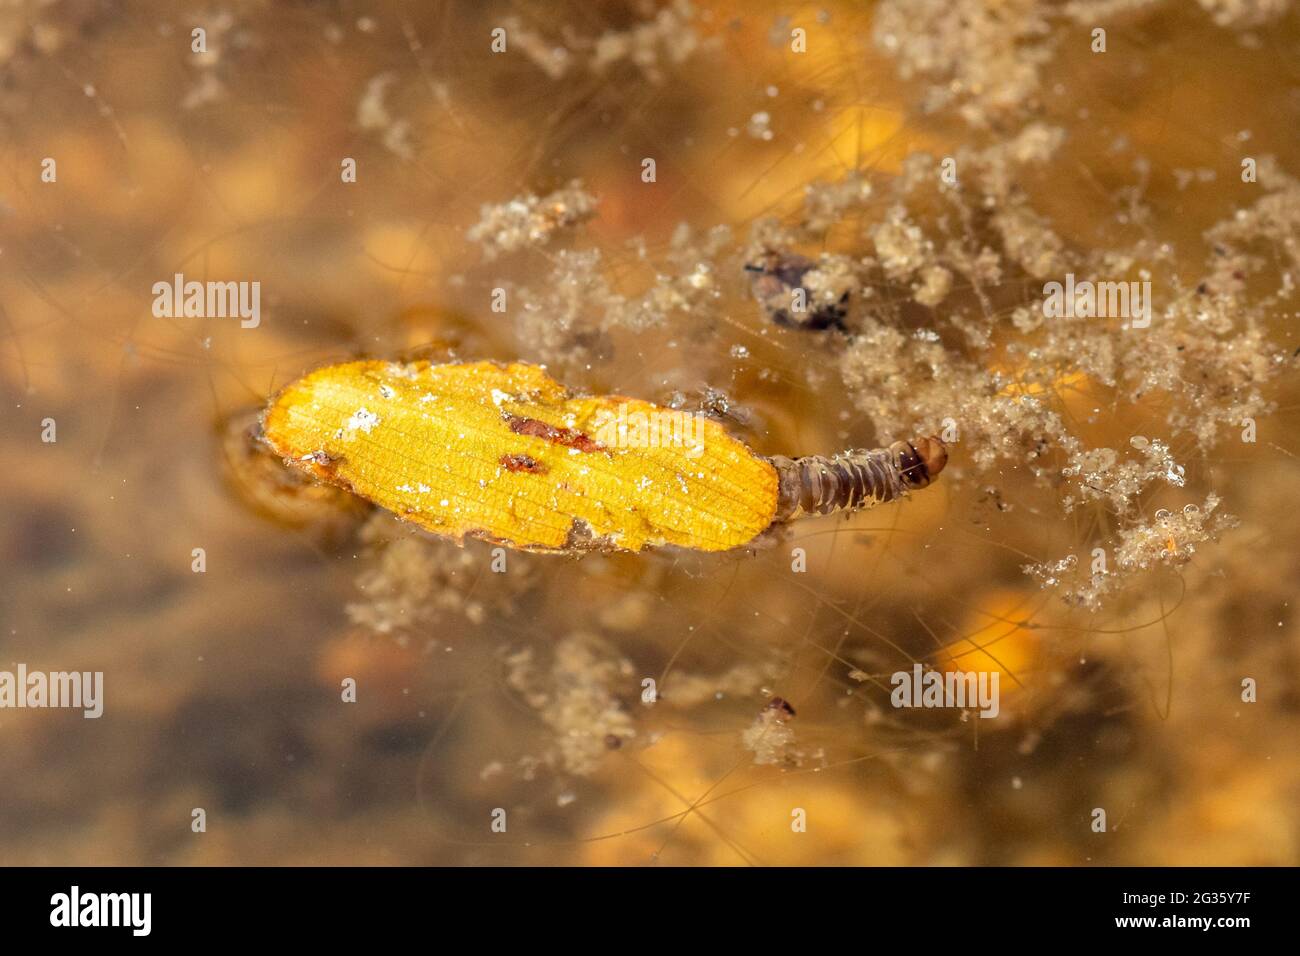 Caddisfly larva (Trichoptera sp.) in a pond using plant material as a case, UK Stock Photo